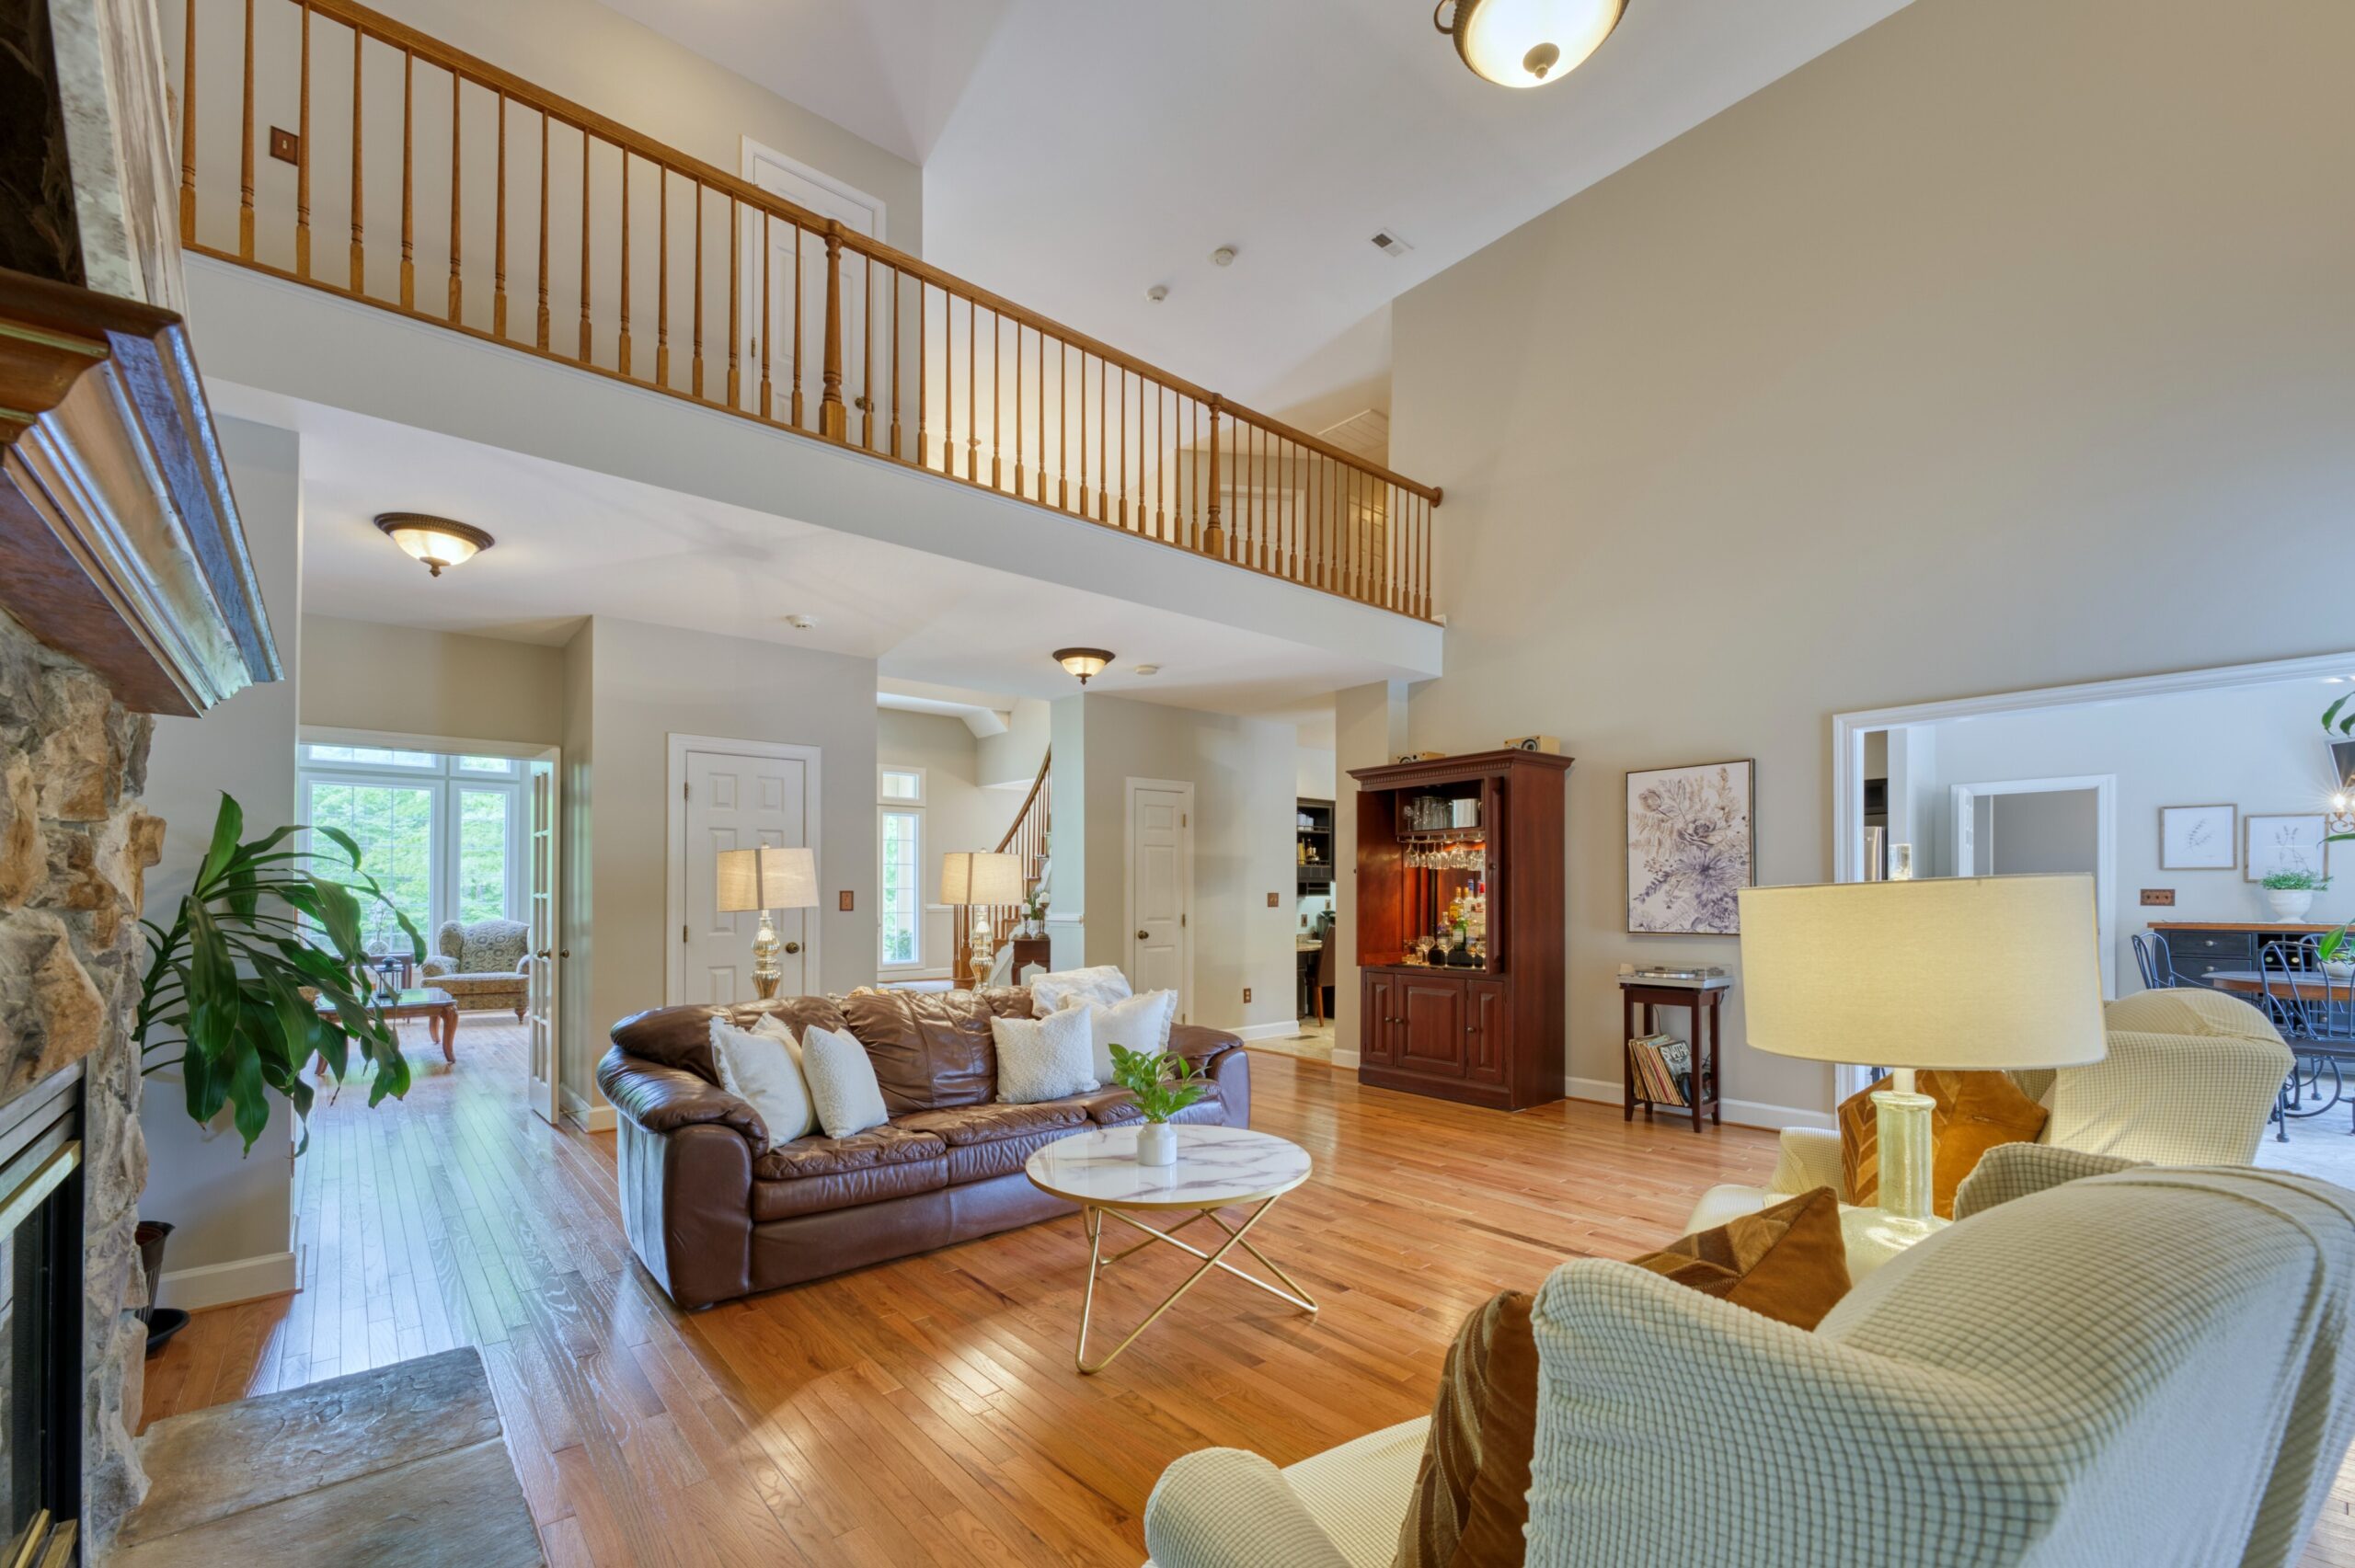 Professional interior photo of 13700 Holly Forest Dr - showing the main living room with hardwood floors, looking away from the windows at the 2nd floor catwalk
